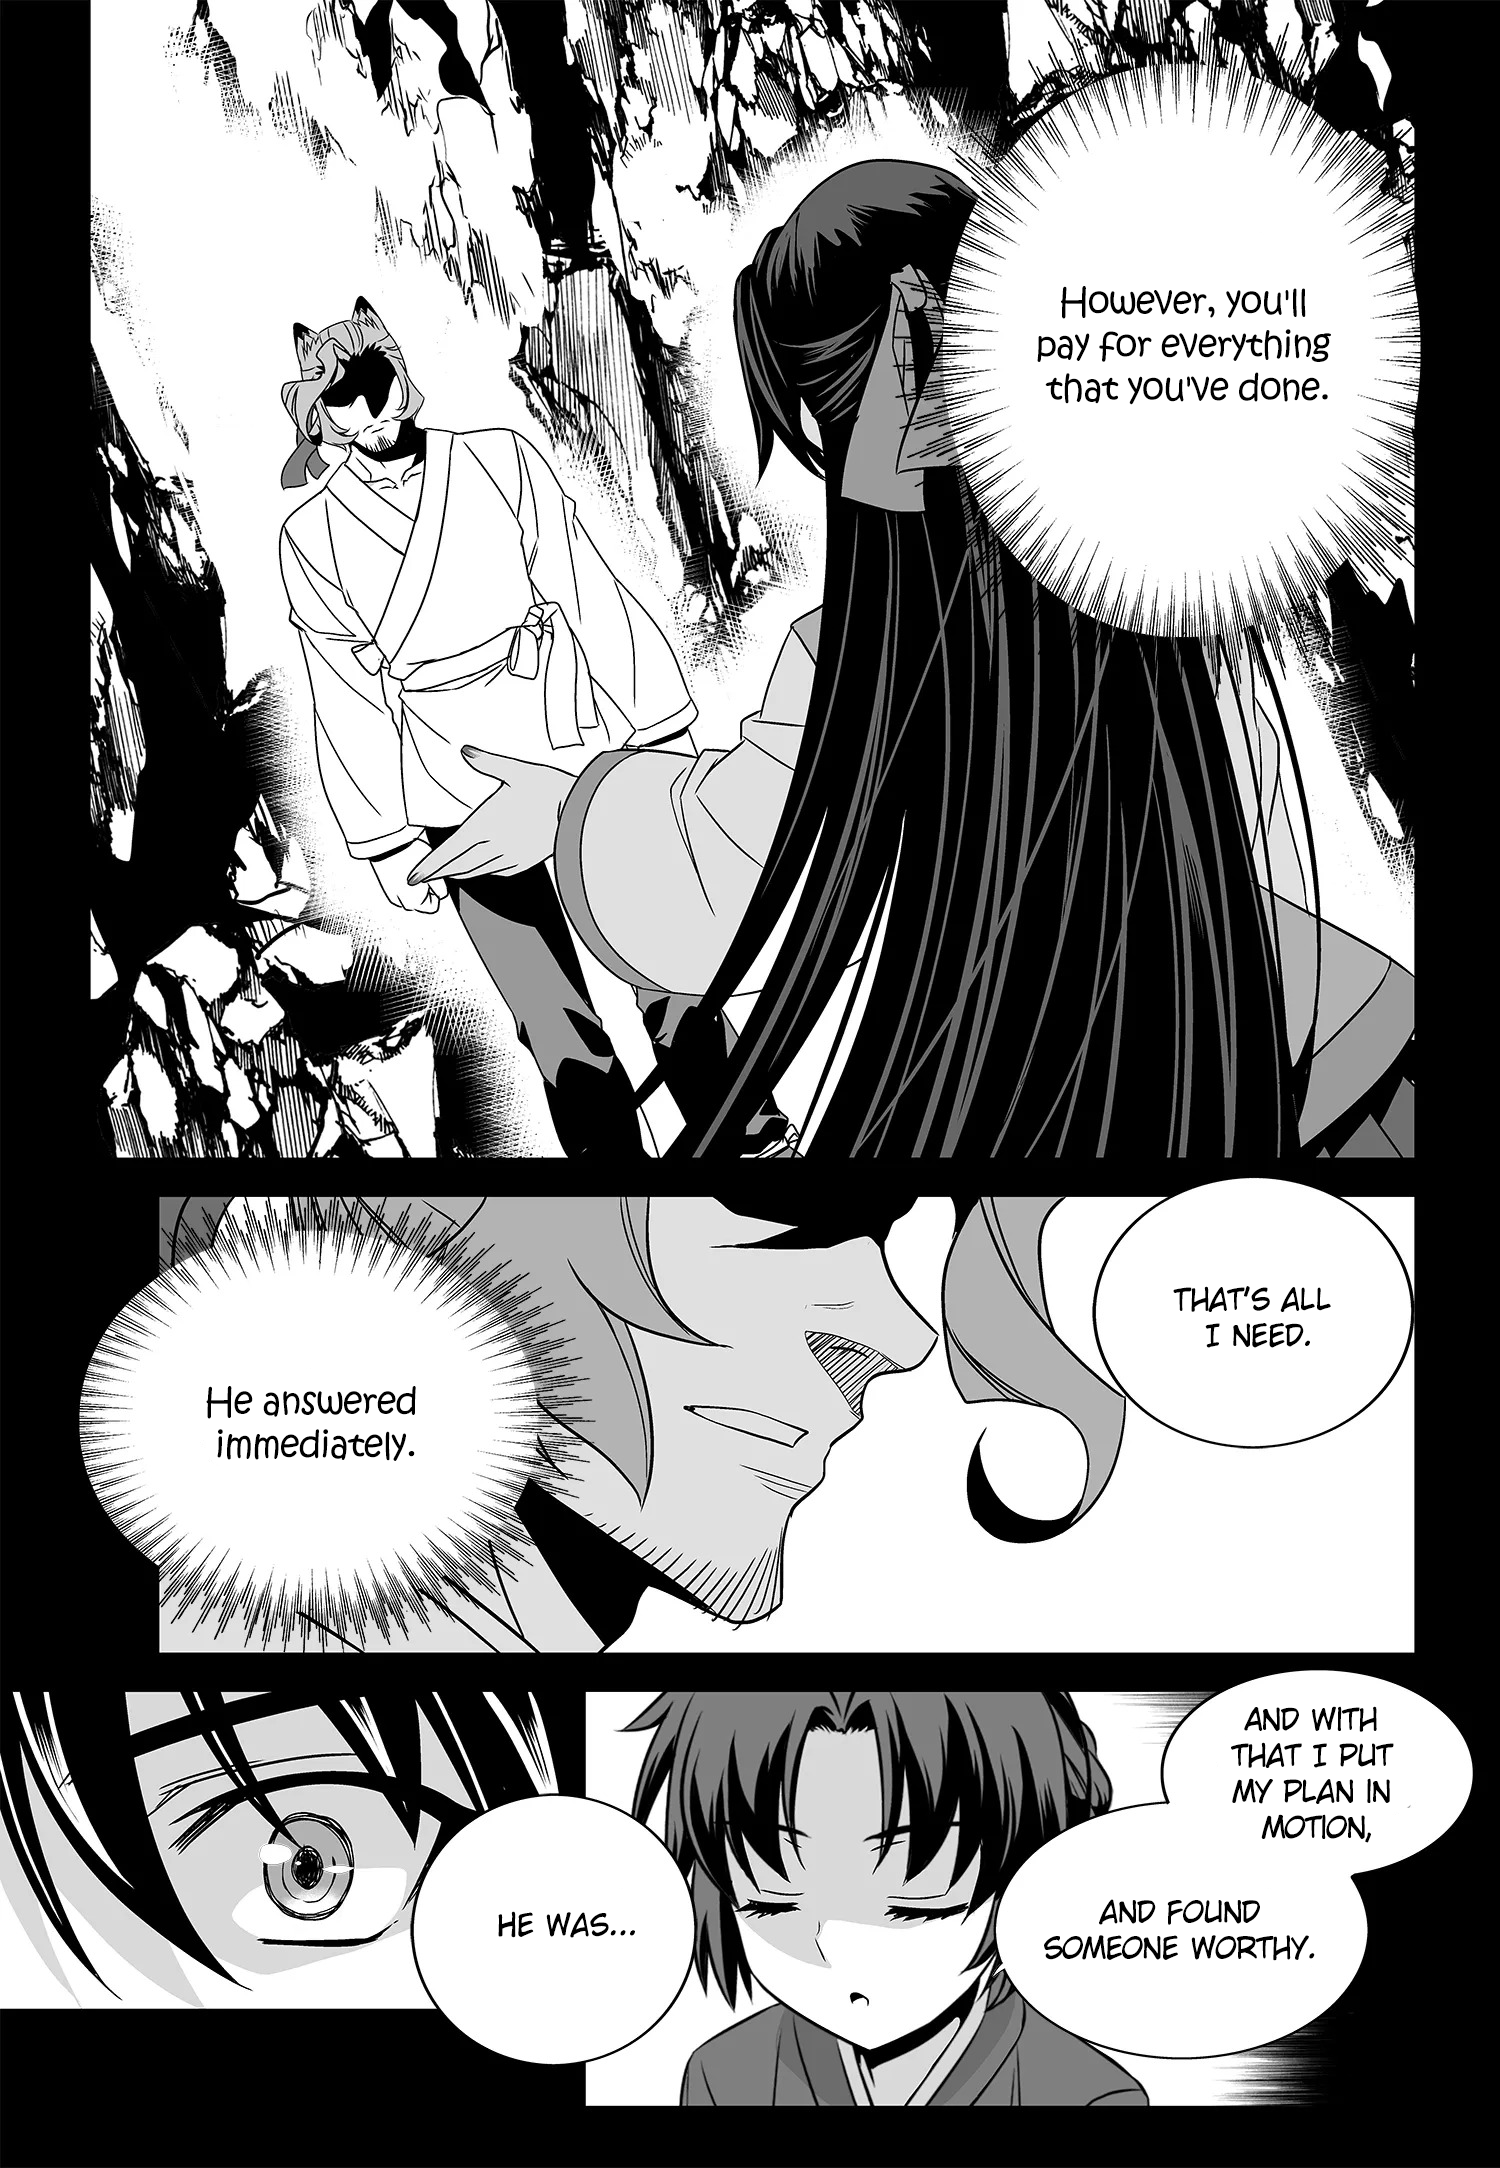 My Love Tiger - Page 3